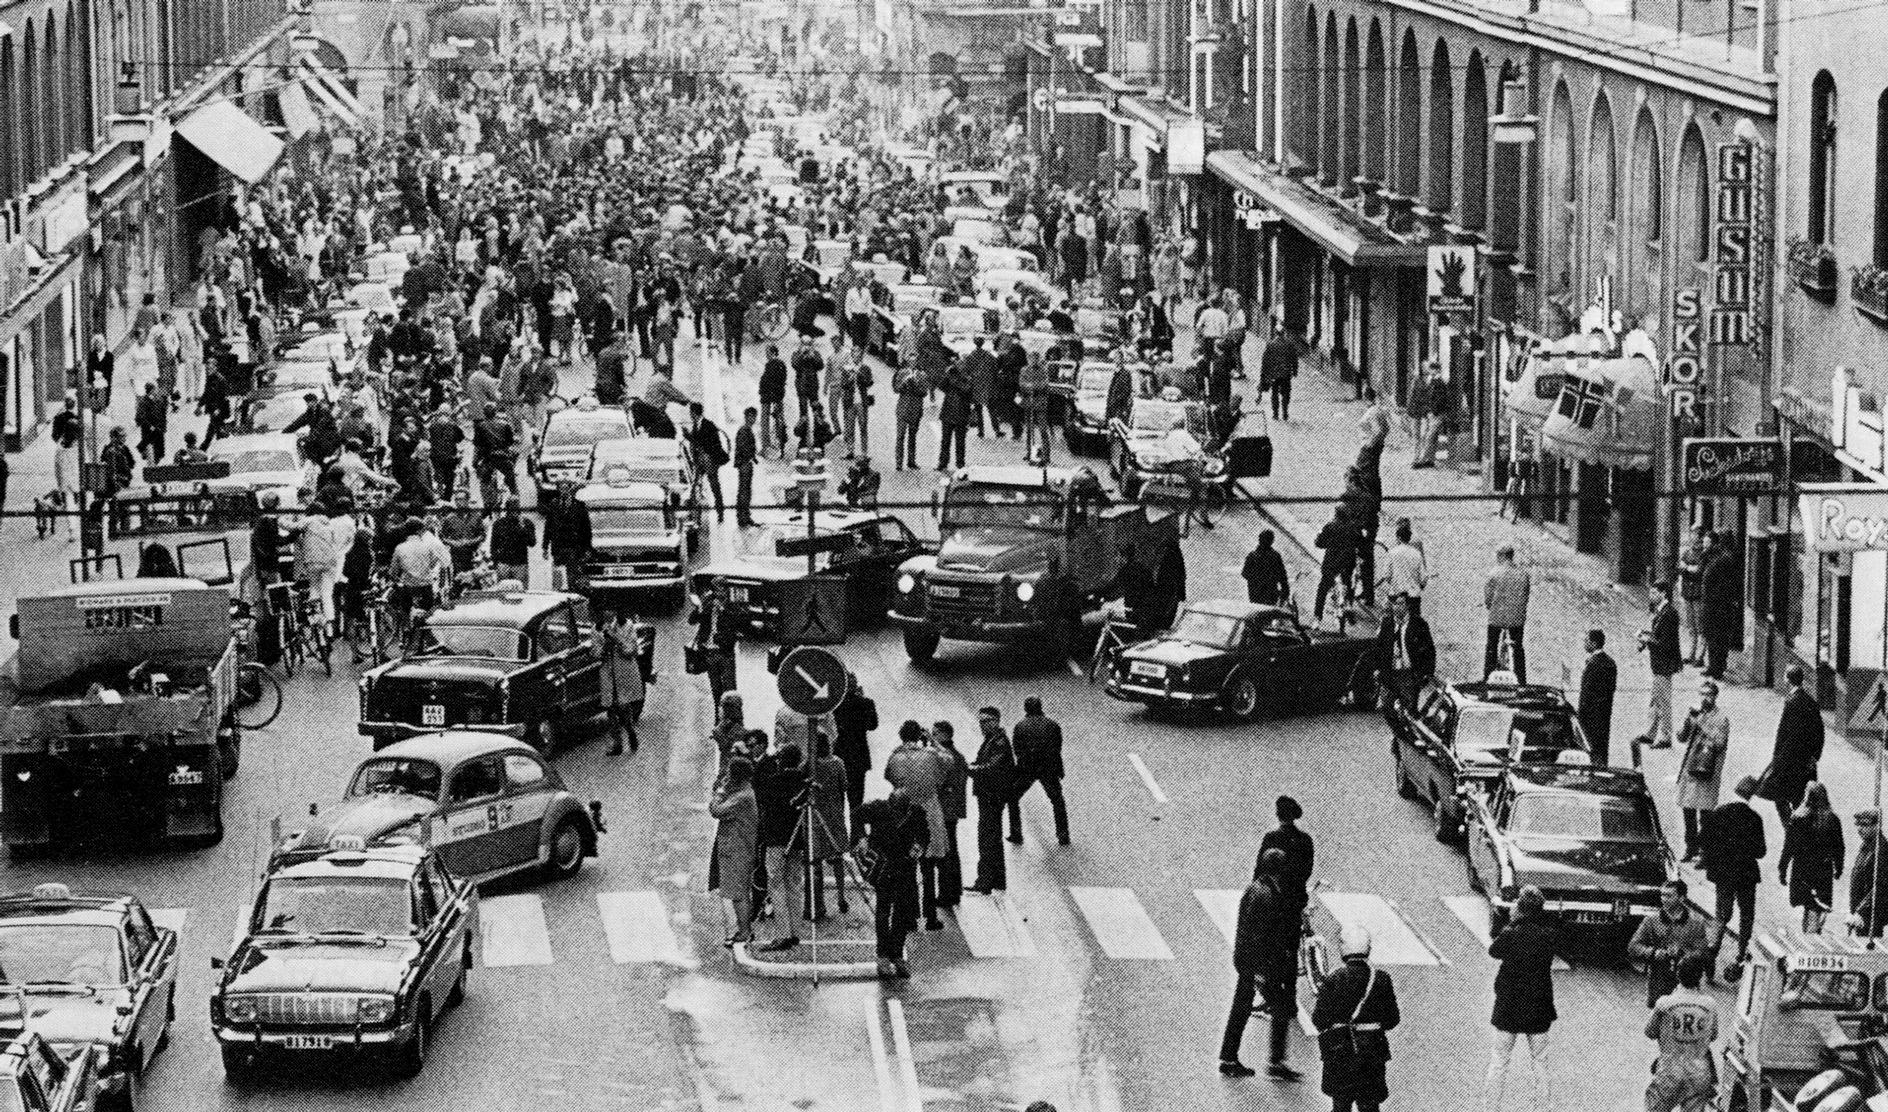 A black-and-white photo showing a city street full of cars going in different directions and pedestrians.